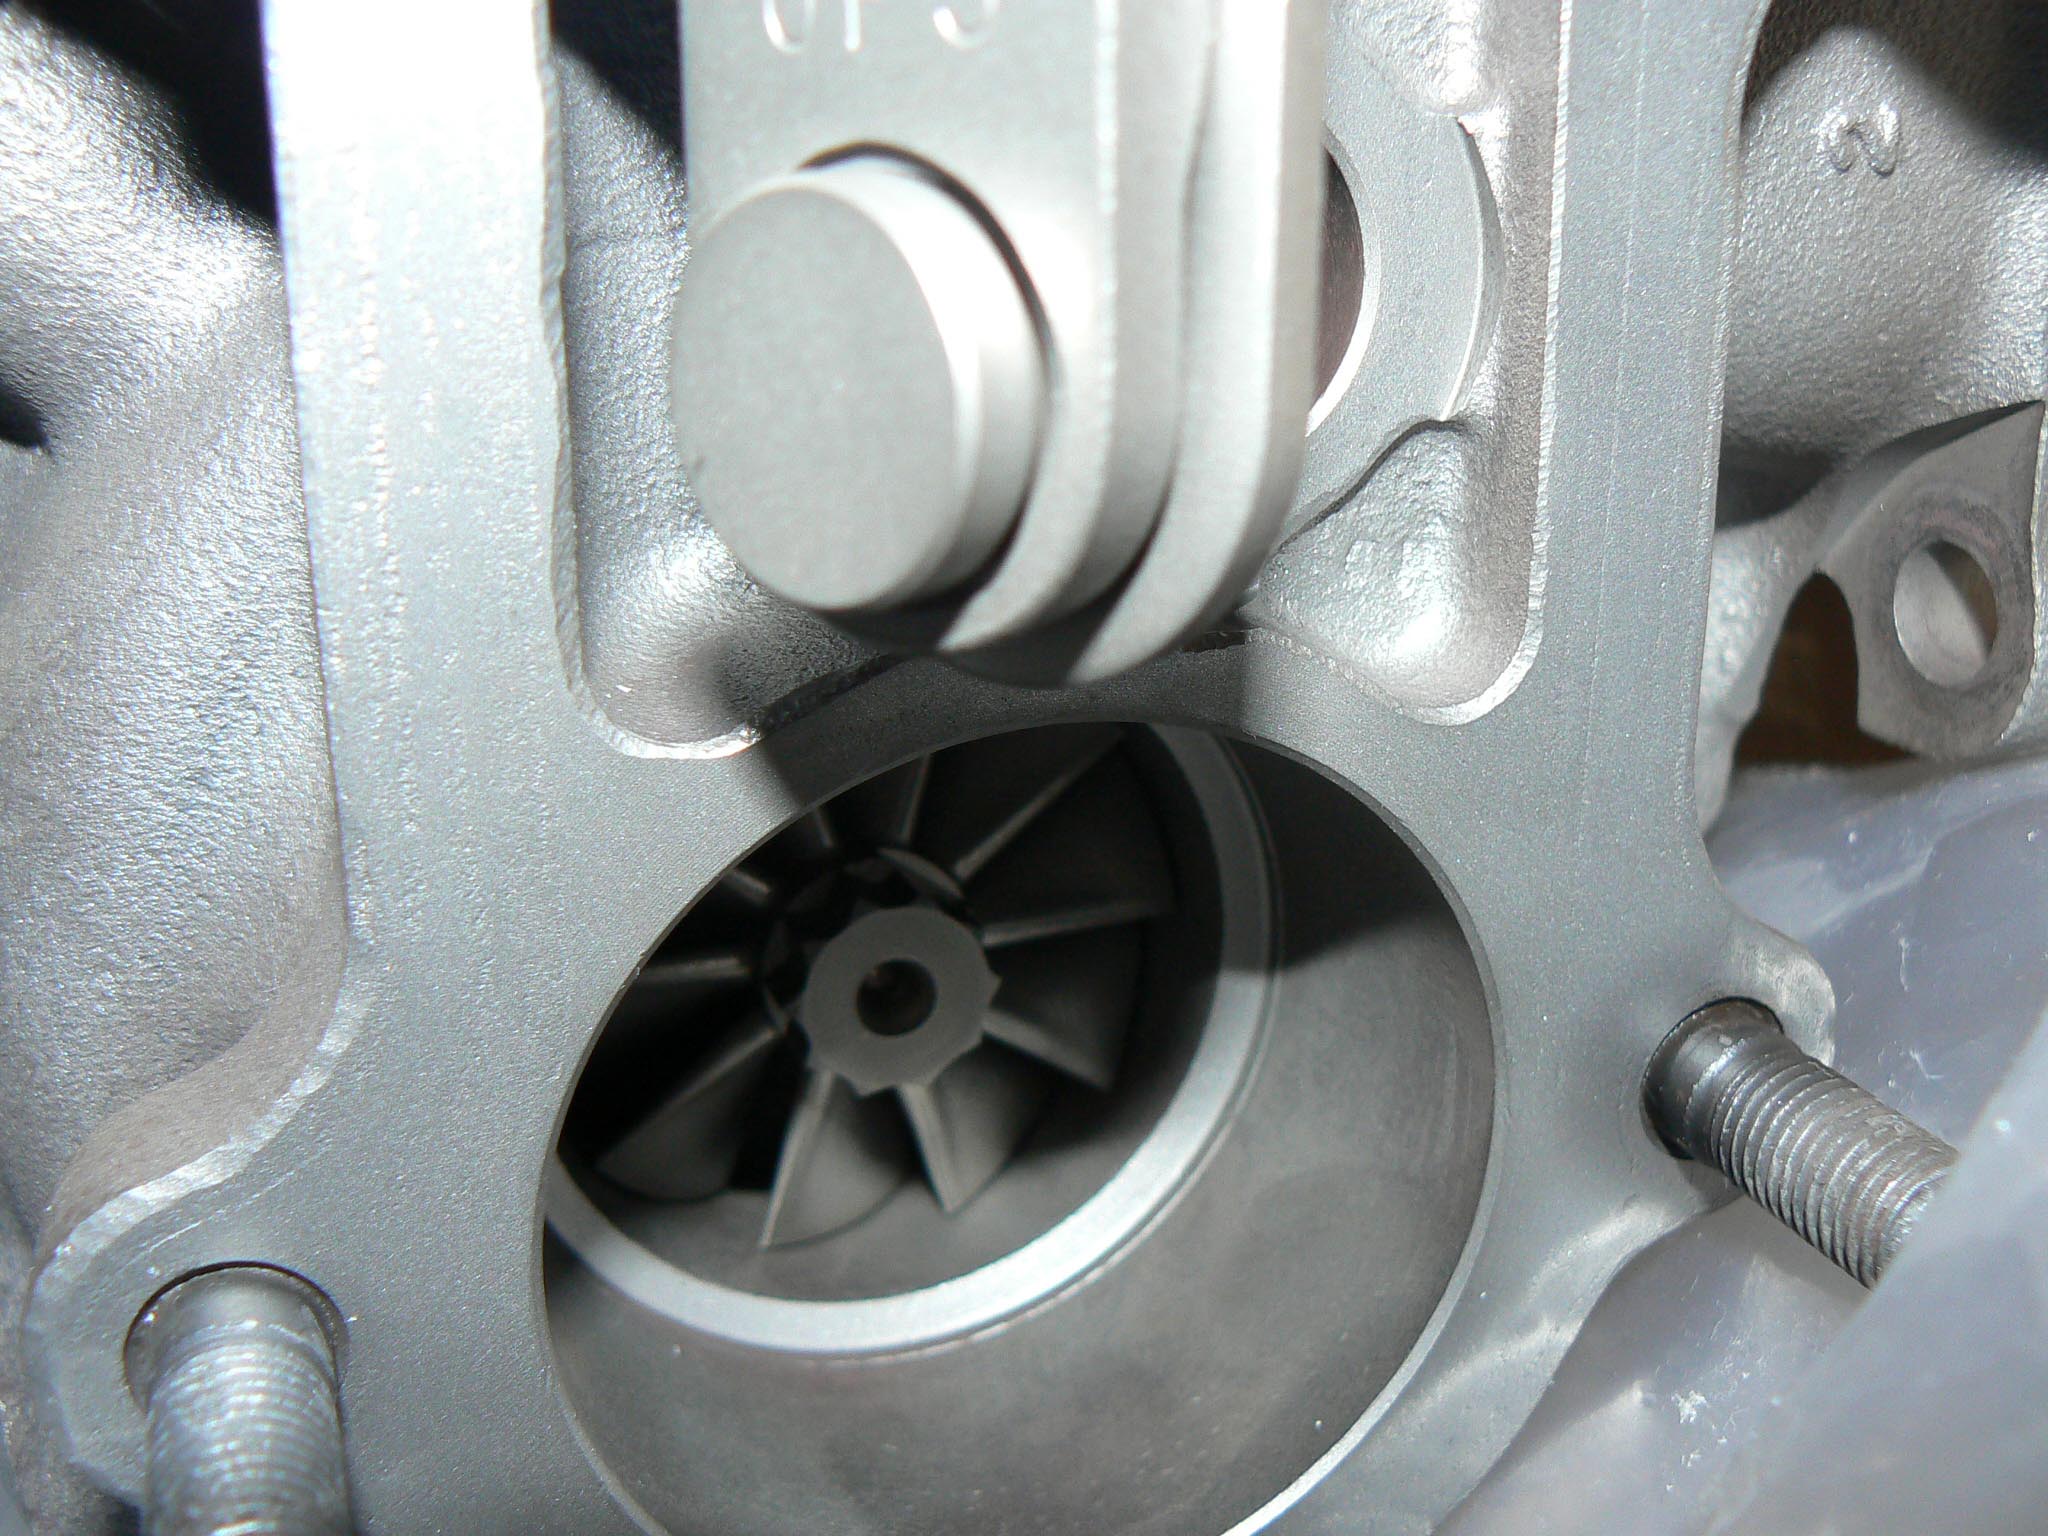 The turbocharger is an air compressor driven by an engine’s exhaust gasses. Exhaust gas exiting the engine is hot, expanding and full of energy. By routing it through a turbine, the energy in the exhaust gas is used to drive, or spin, the turbocharger. Effectively, a turbocharger sits in the engine’s exhaust stream, borrowing some of the energy from the exhaust as it exits the engine. In this picture, exhaust is forced through the turbine visible at the bottom of the turbocharger, causing it to spin rapidly, and driving the turbocharger into action. After driving the turbine, the exhaust gasses are routed through the exhaust system and out of the tailpipe.